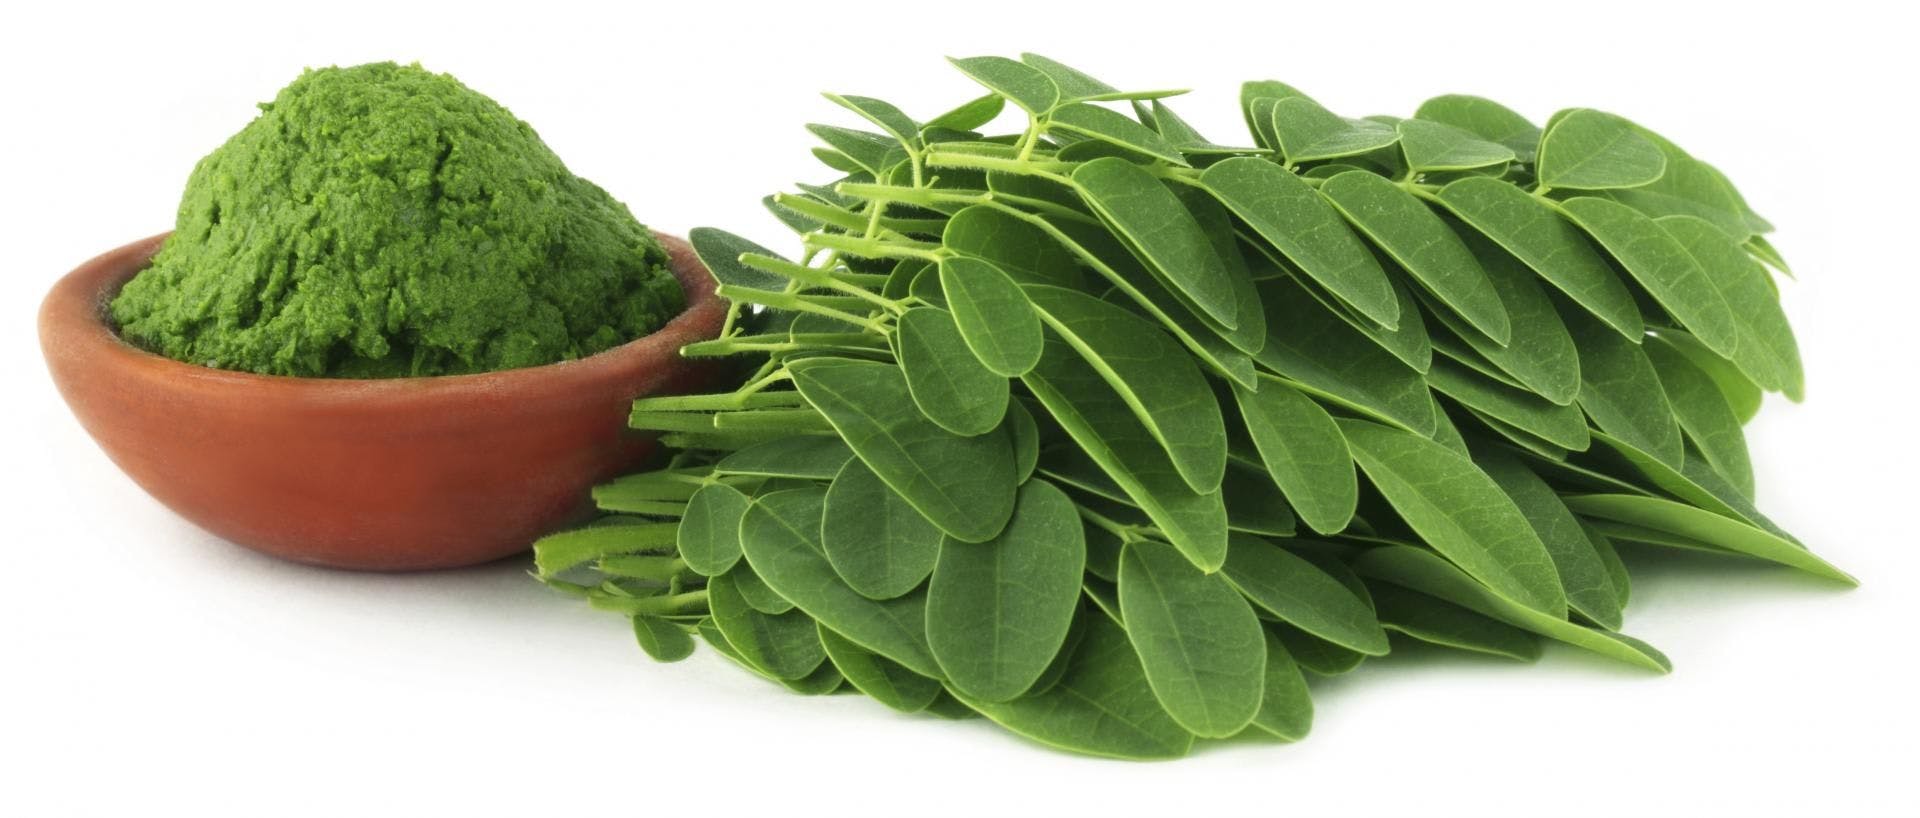 Moringa May Be an Attractive Soap Ingredient